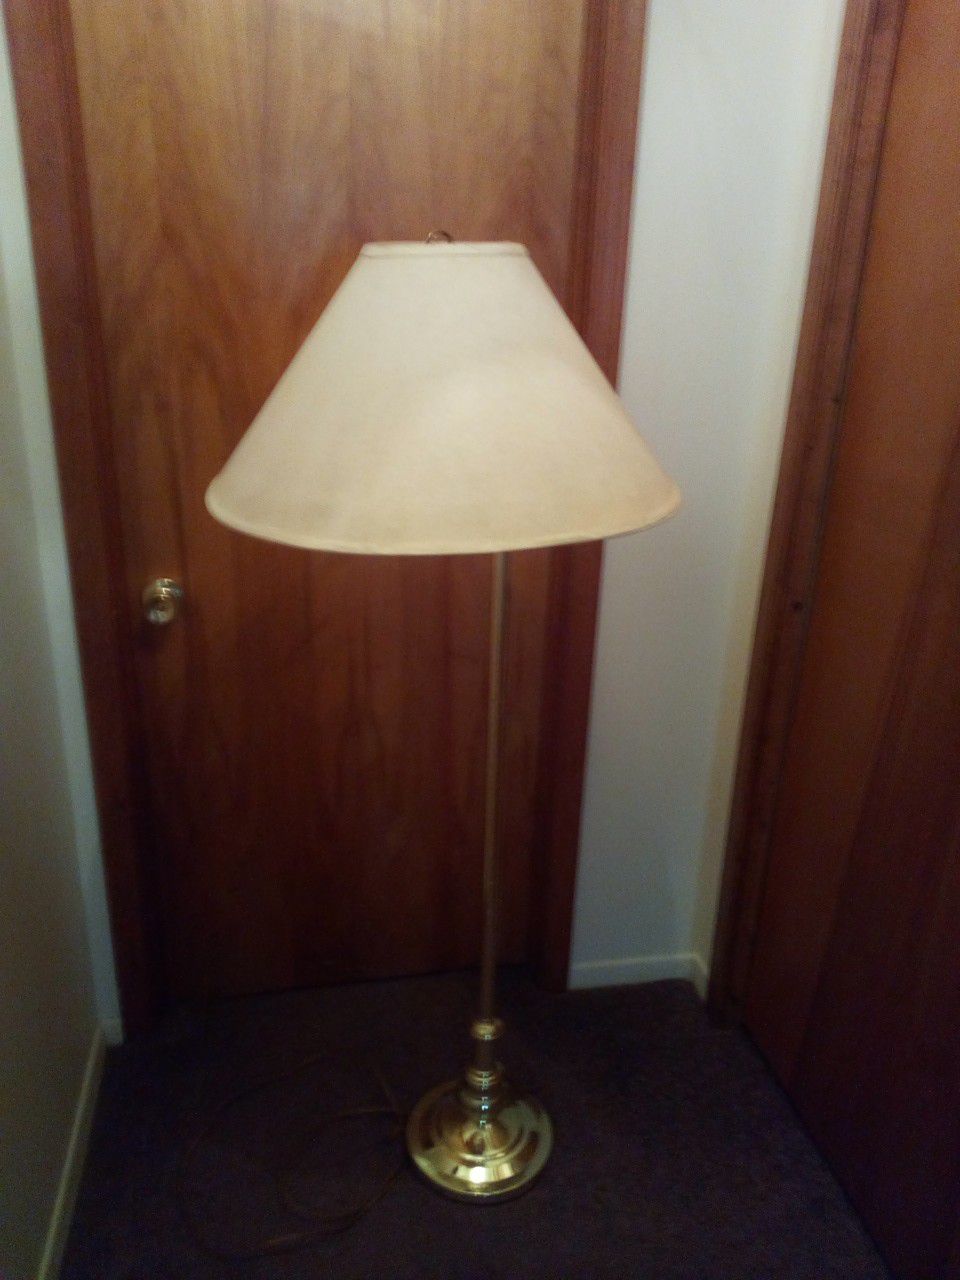 Polished brass floor lamp with swing arm /lamp shade is 23 inches in diameter /lamp height is 60 inches